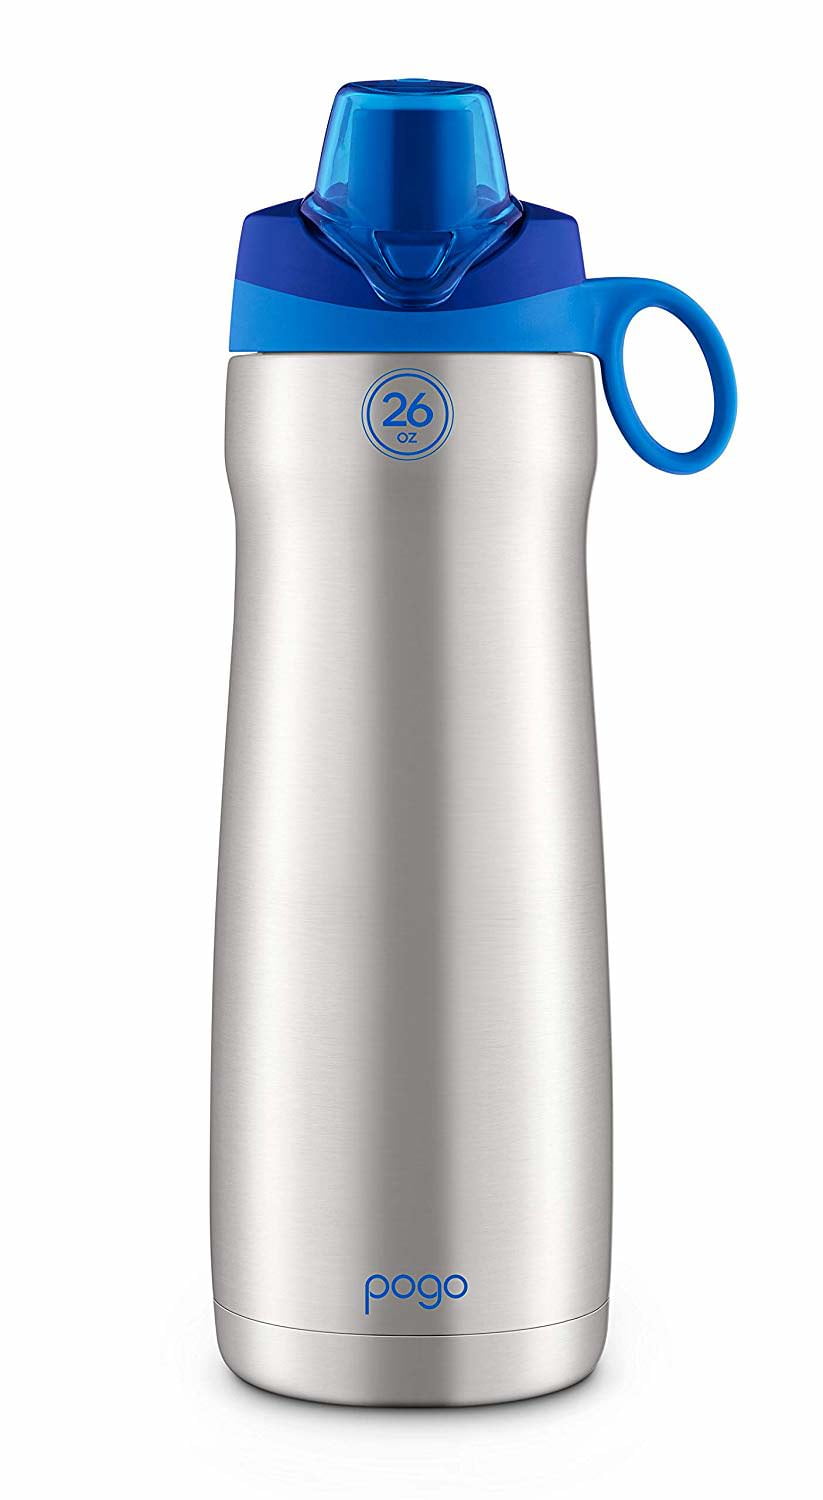 Pogo Vacuum Stainless Steel Water Bottle with Chug Lid, Blue, 26 oz Pogo Water Bottle Stainless Steel